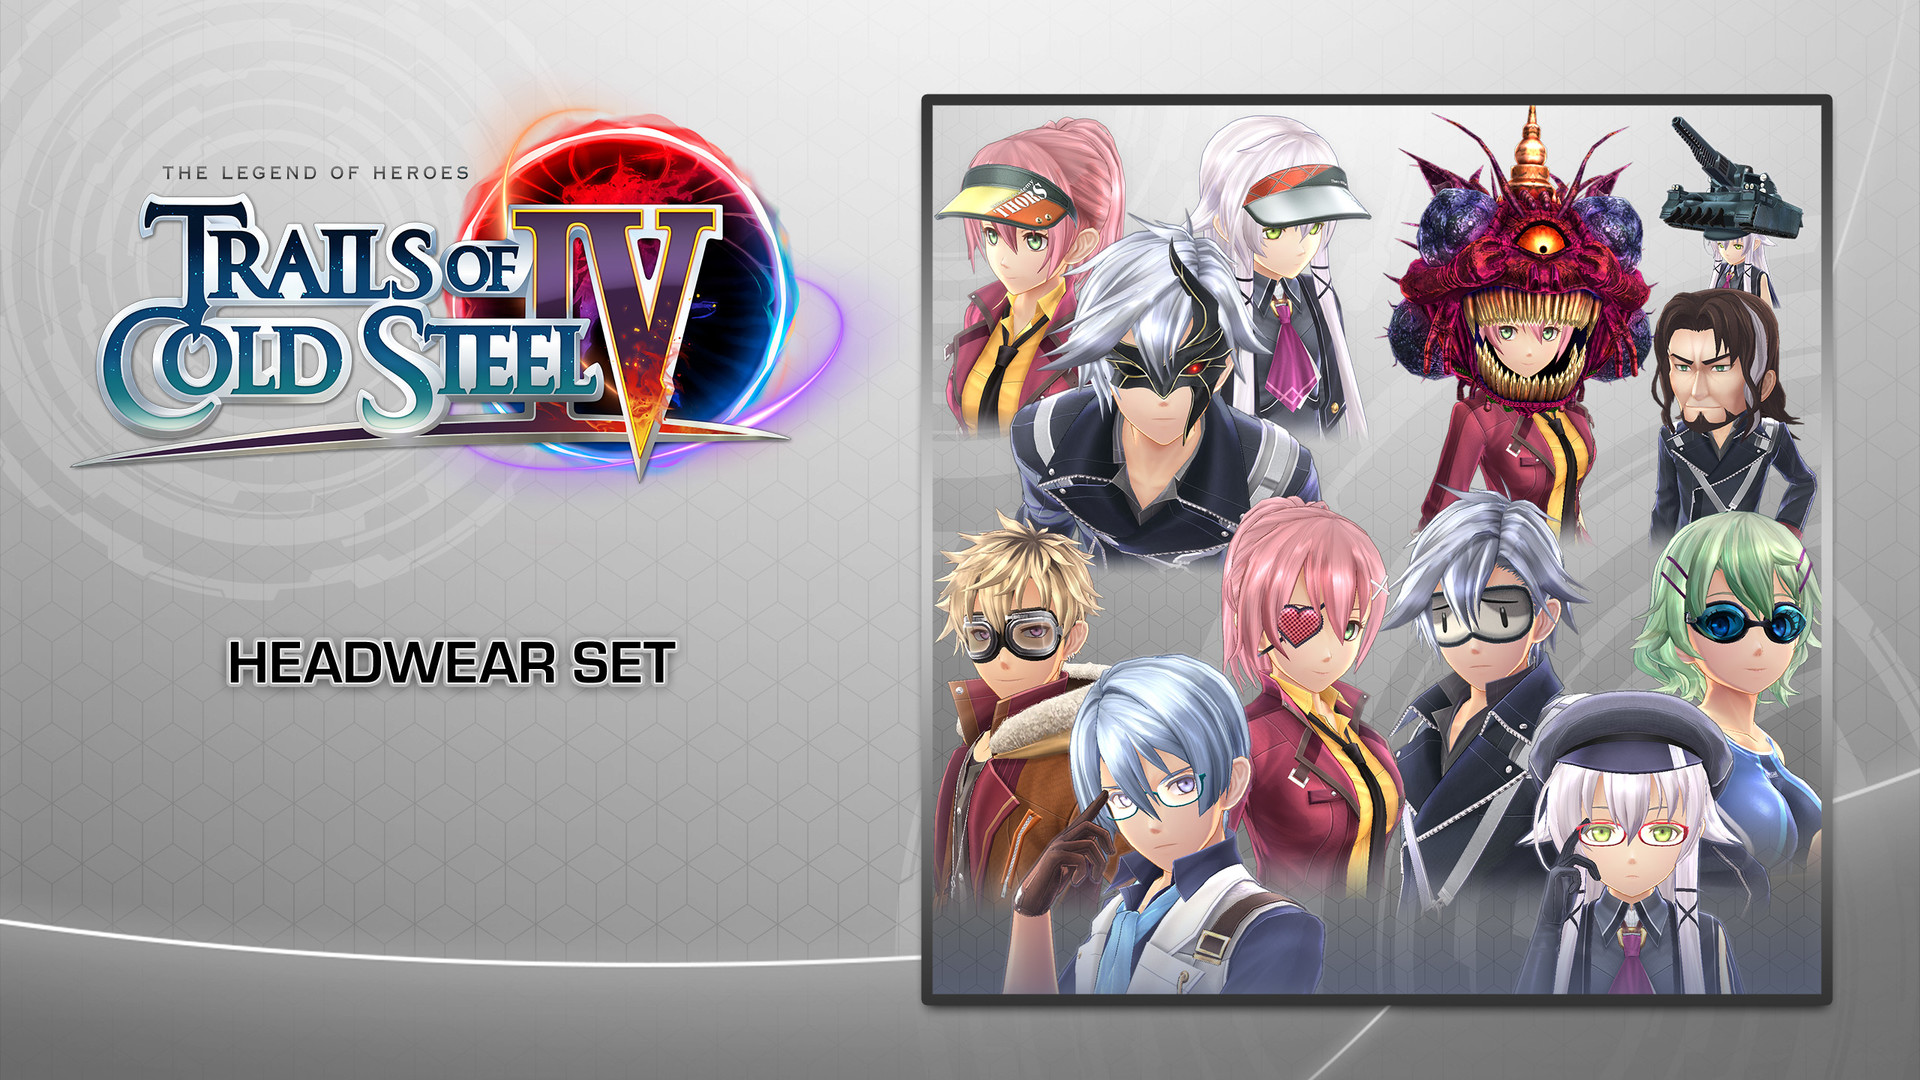 The Legend of Heroes: Trails of Cold Steel IV - Headwear Set Featured Screenshot #1